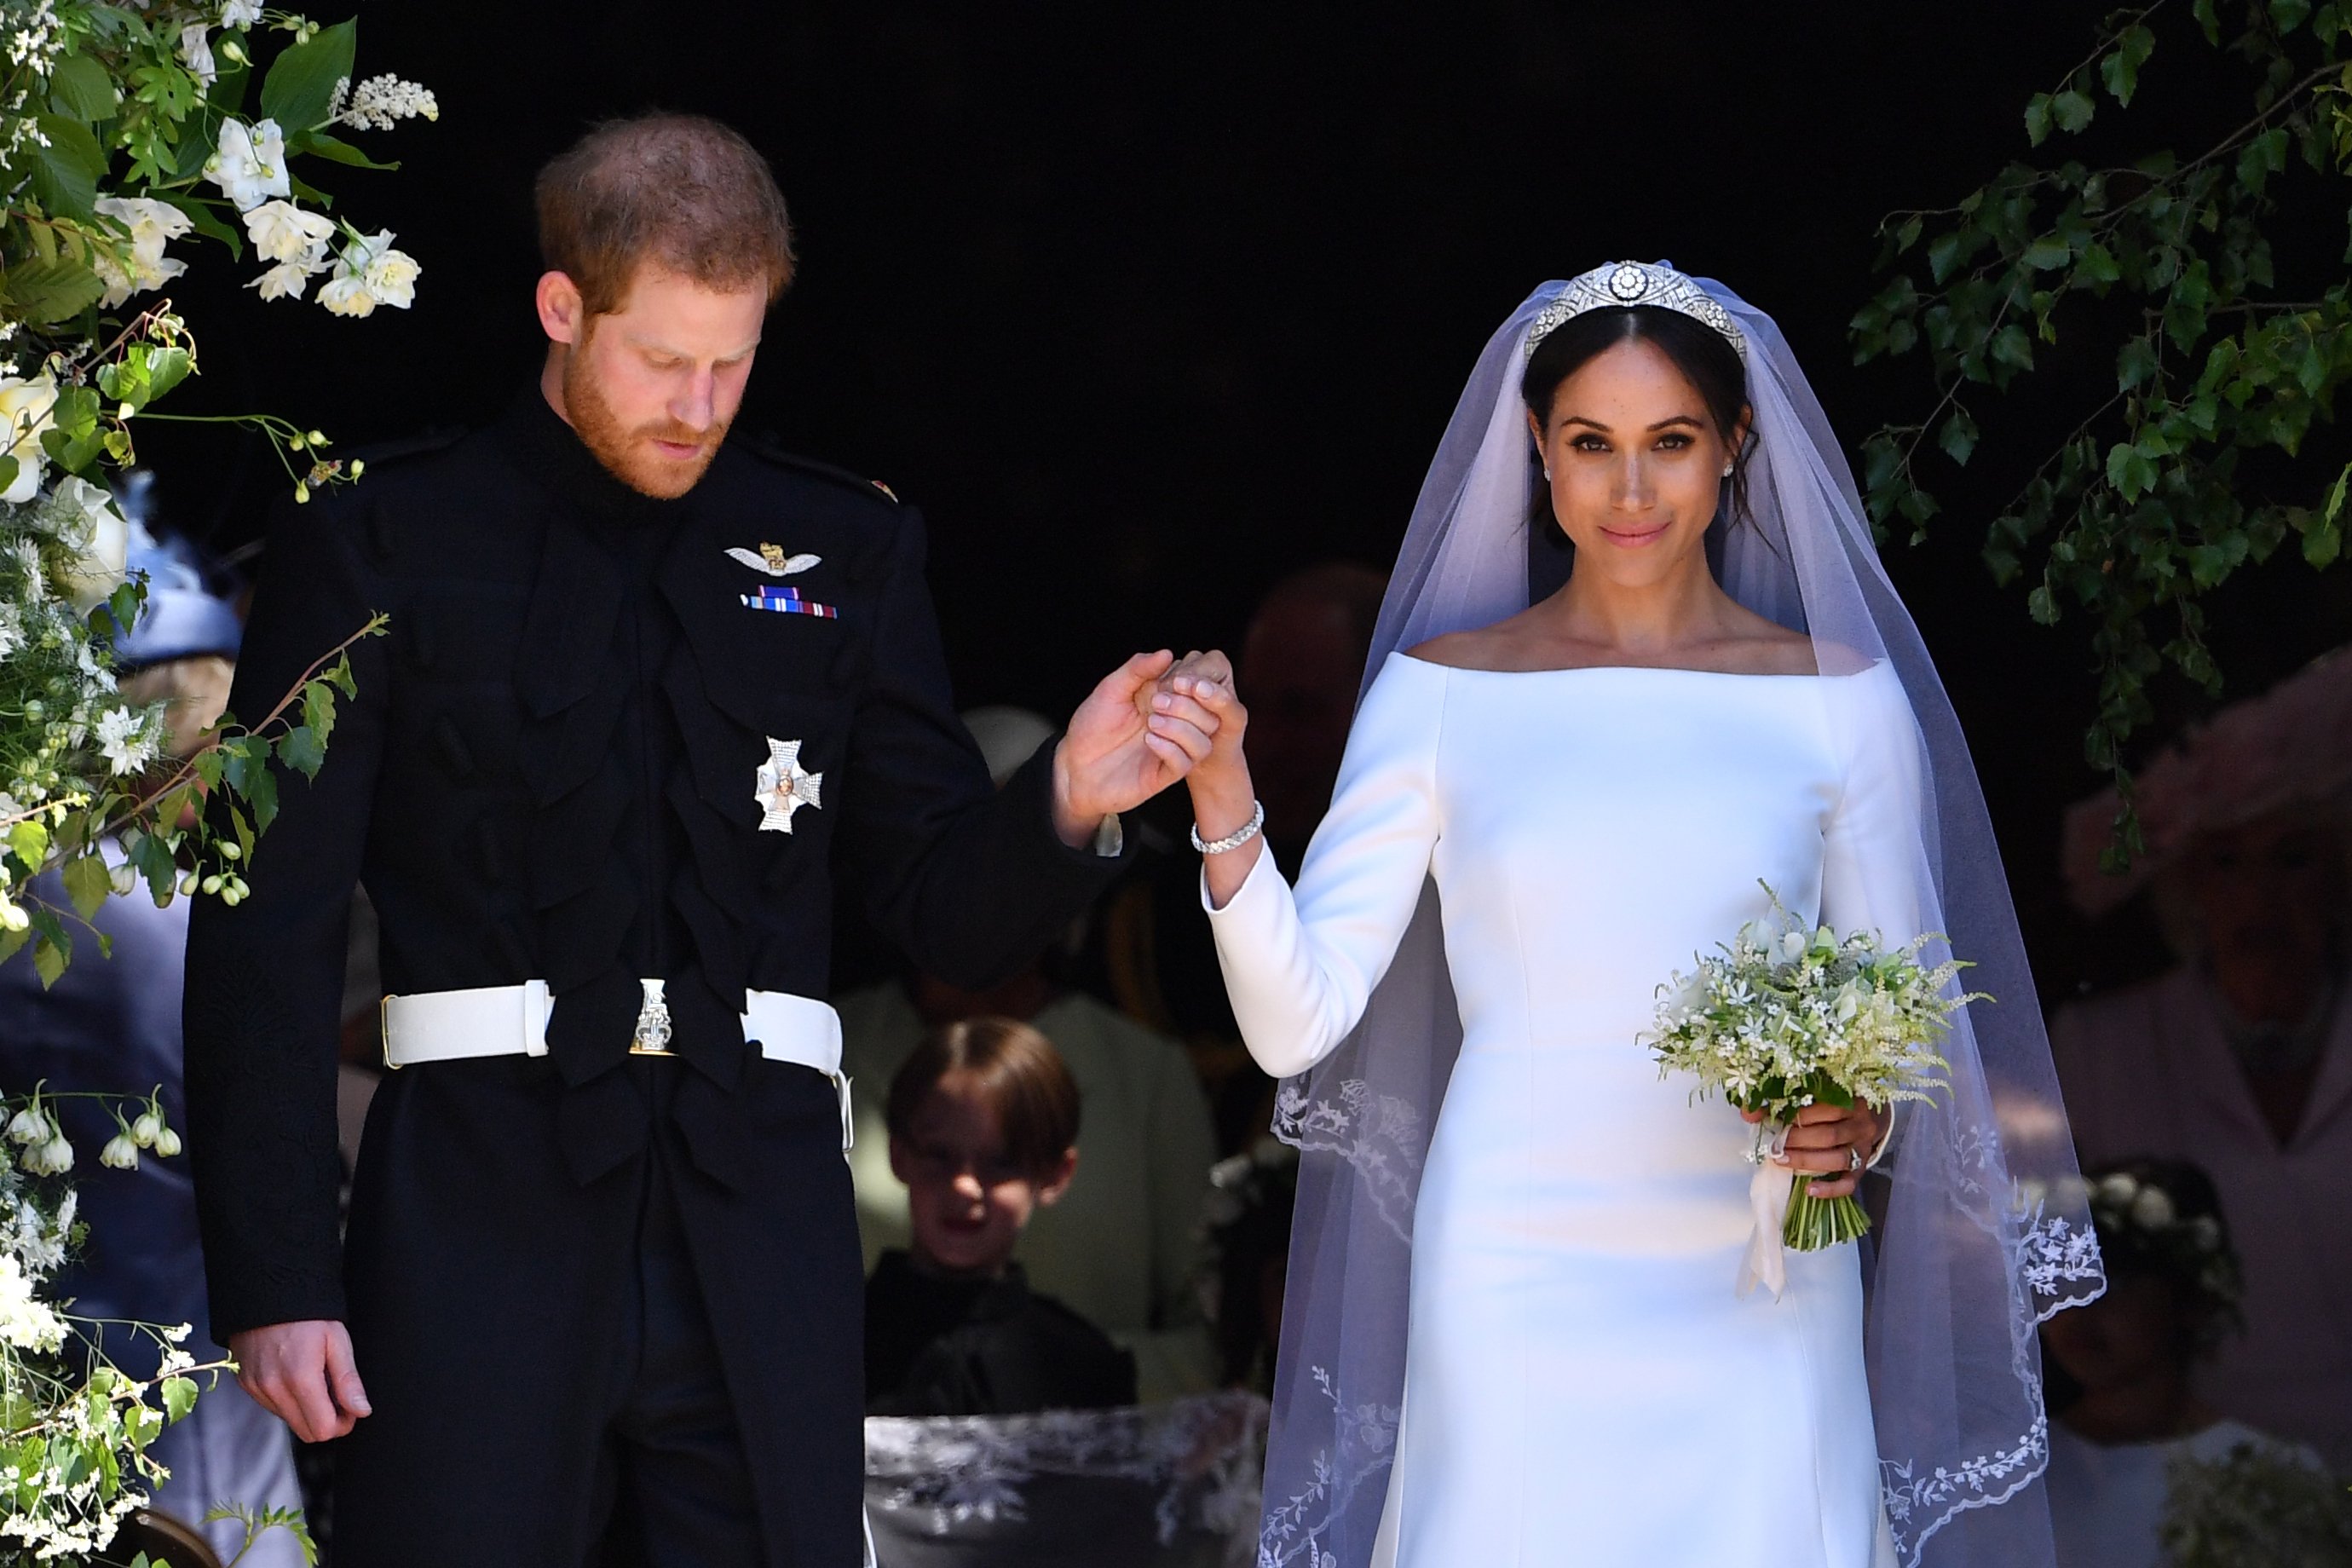 Prince Harry and Meghan Markle, who is wearing a Cartier bracelet, leave St. George's Chapel after their wedding